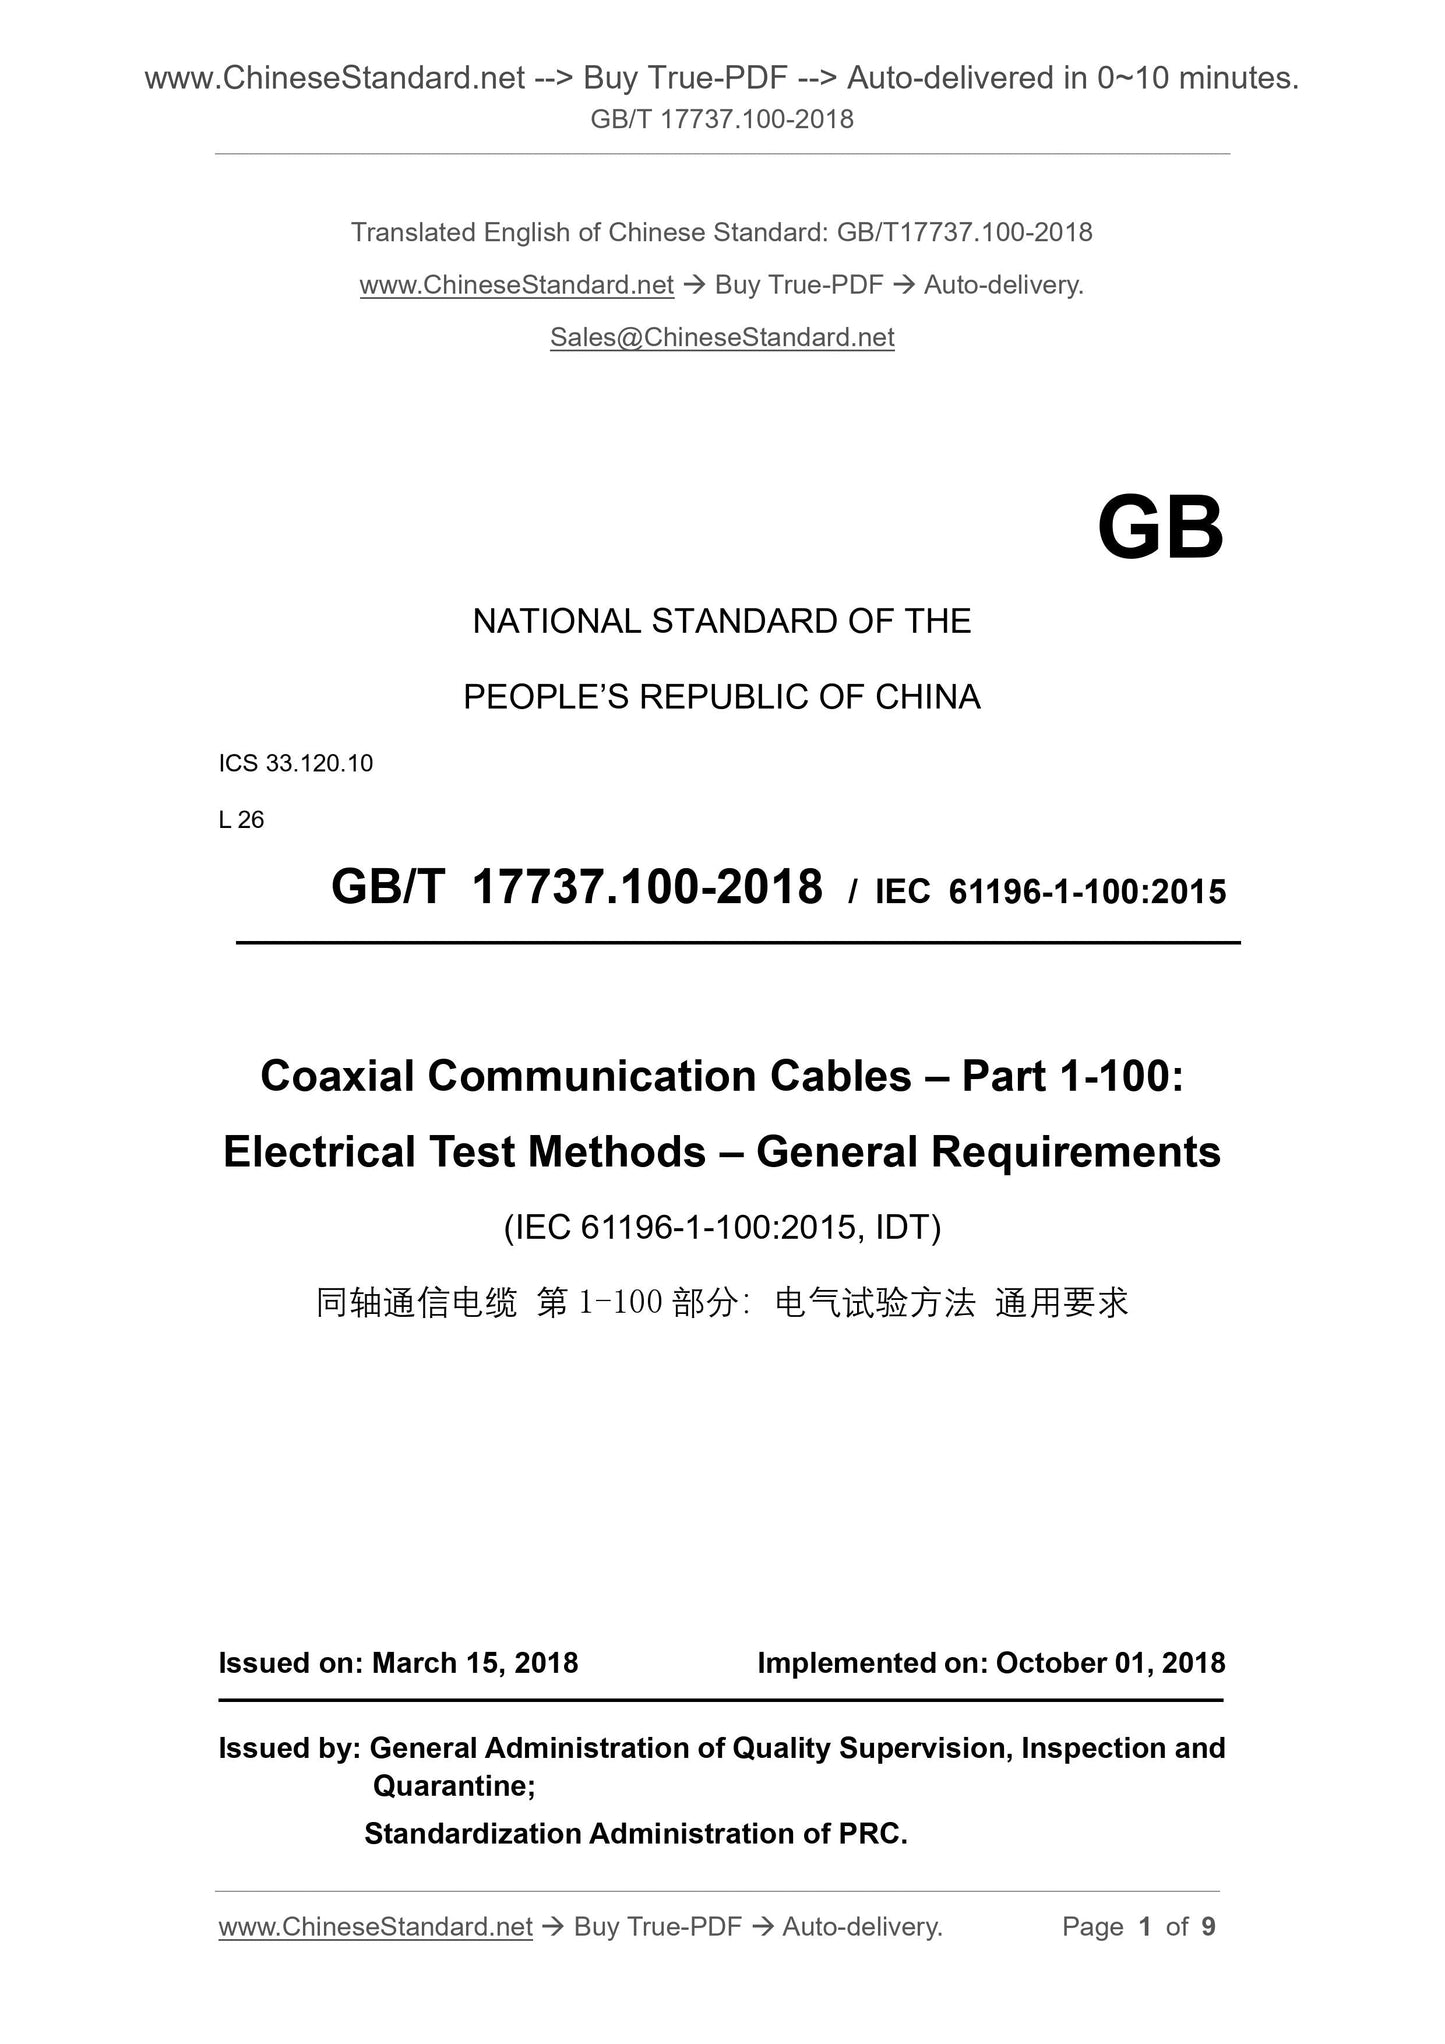 GB/T 17737.100-2018 Page 1